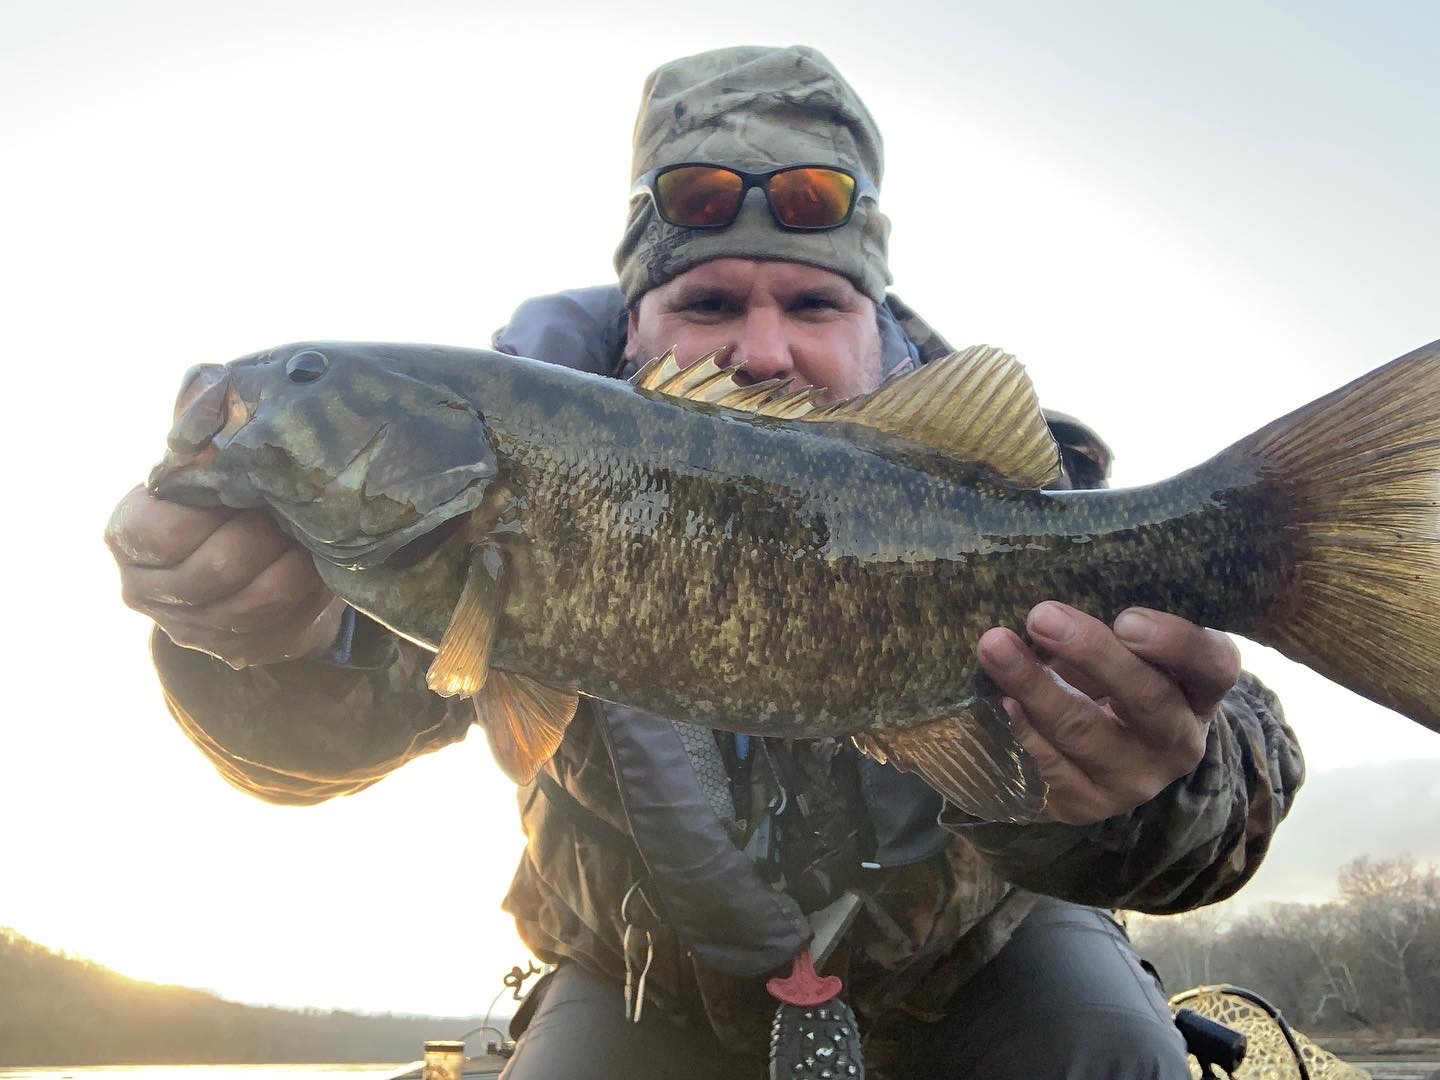 Boyds Guiding Rates, guided fishing trips rates in PA! Susquehanna River  Smallmouth Bass fishing.